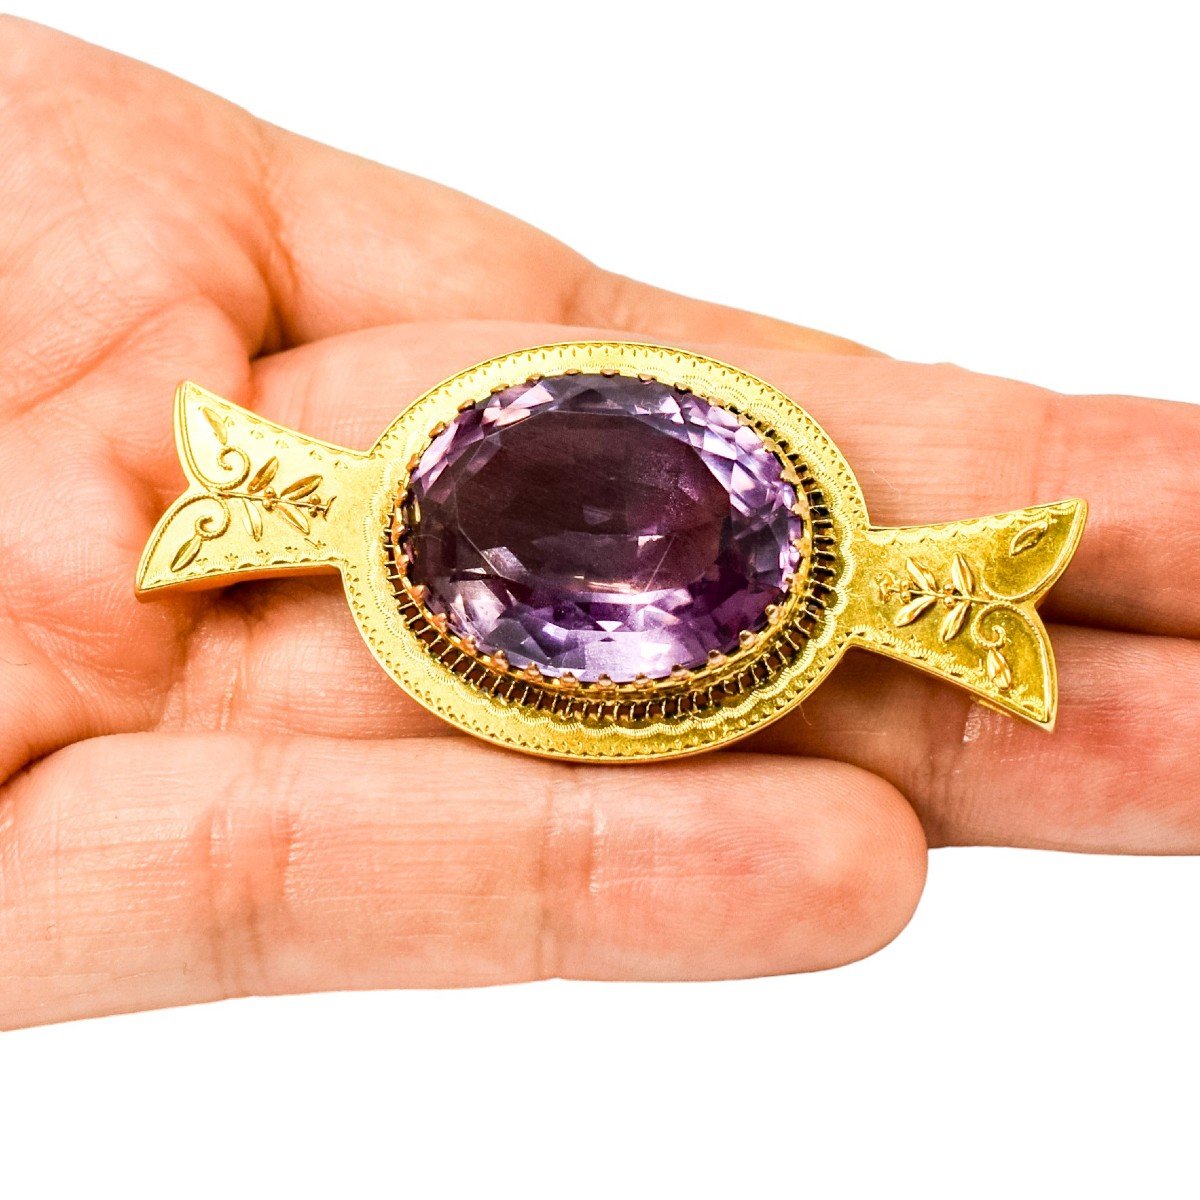 Exquisite Victorian 18ct Yellow Gold Etruscan Revival Brooch With Amethyst-photo-6